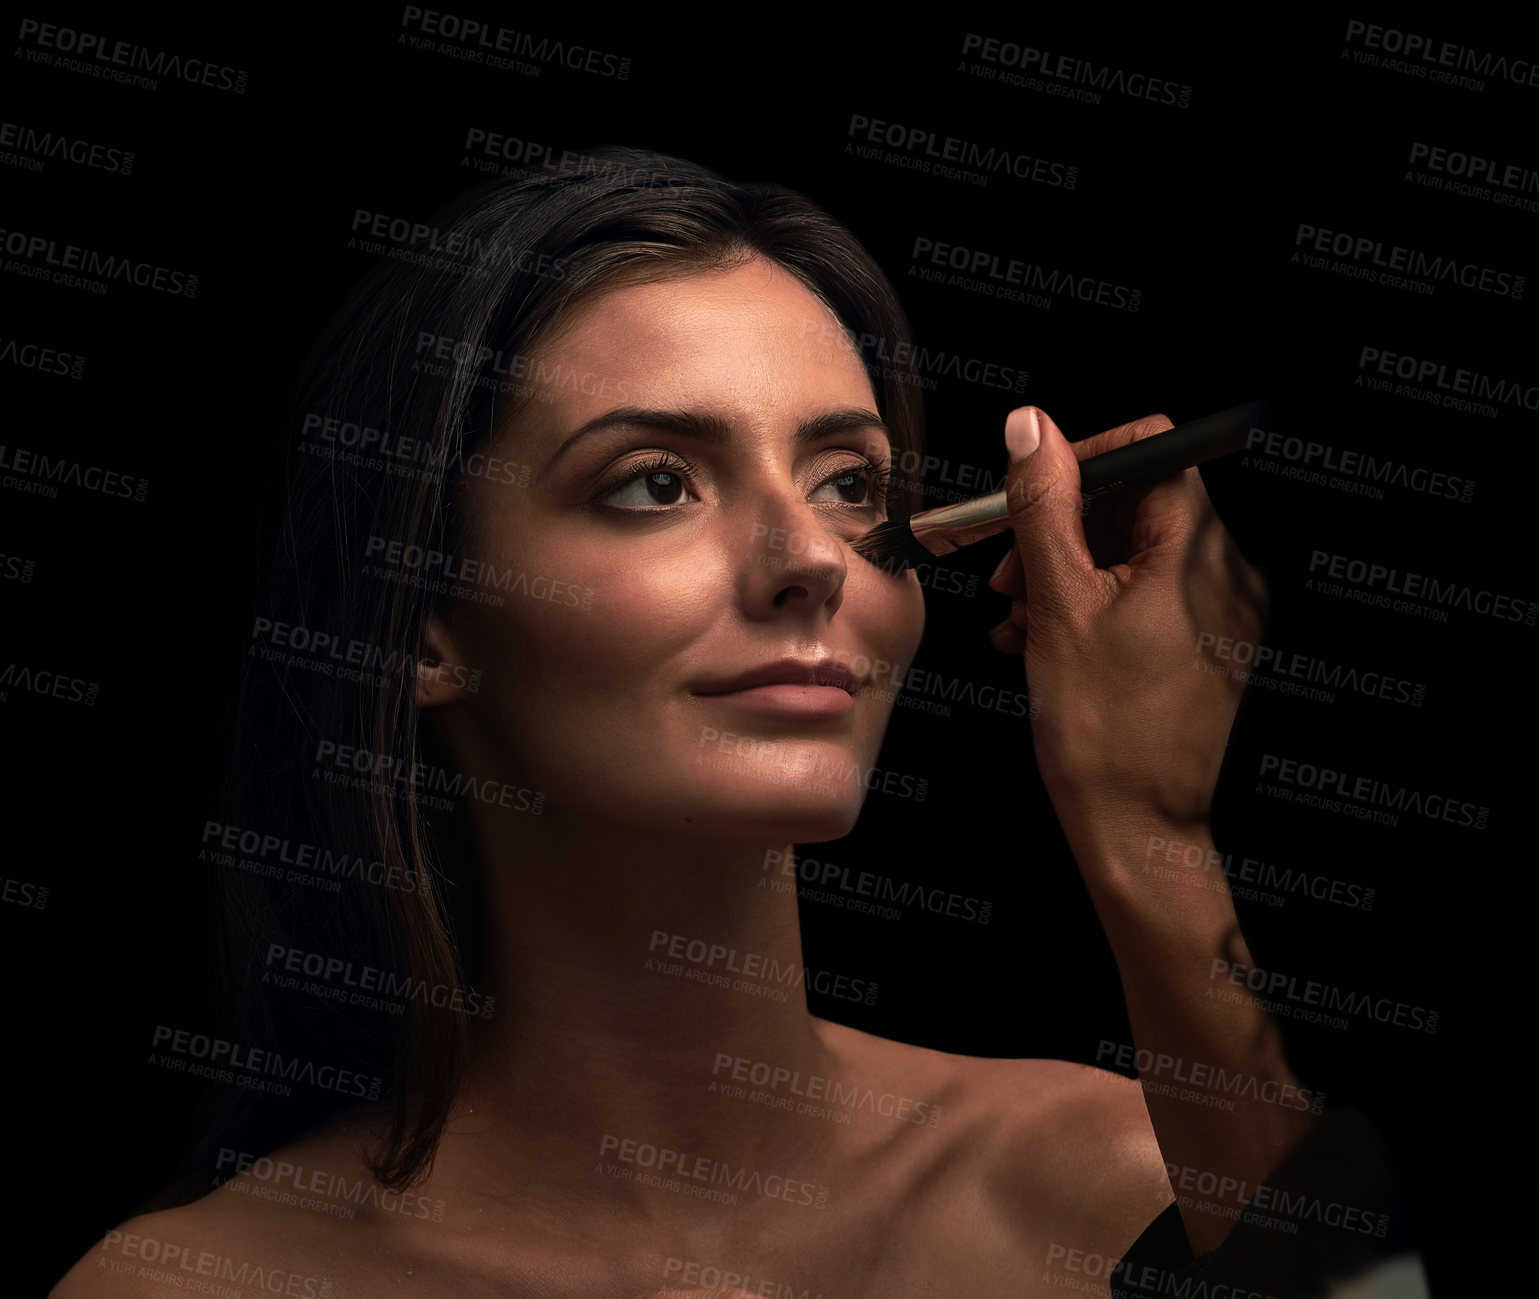 Buy stock photo Studio shot of an attractive young woman having makeup applied on her face against a dark background